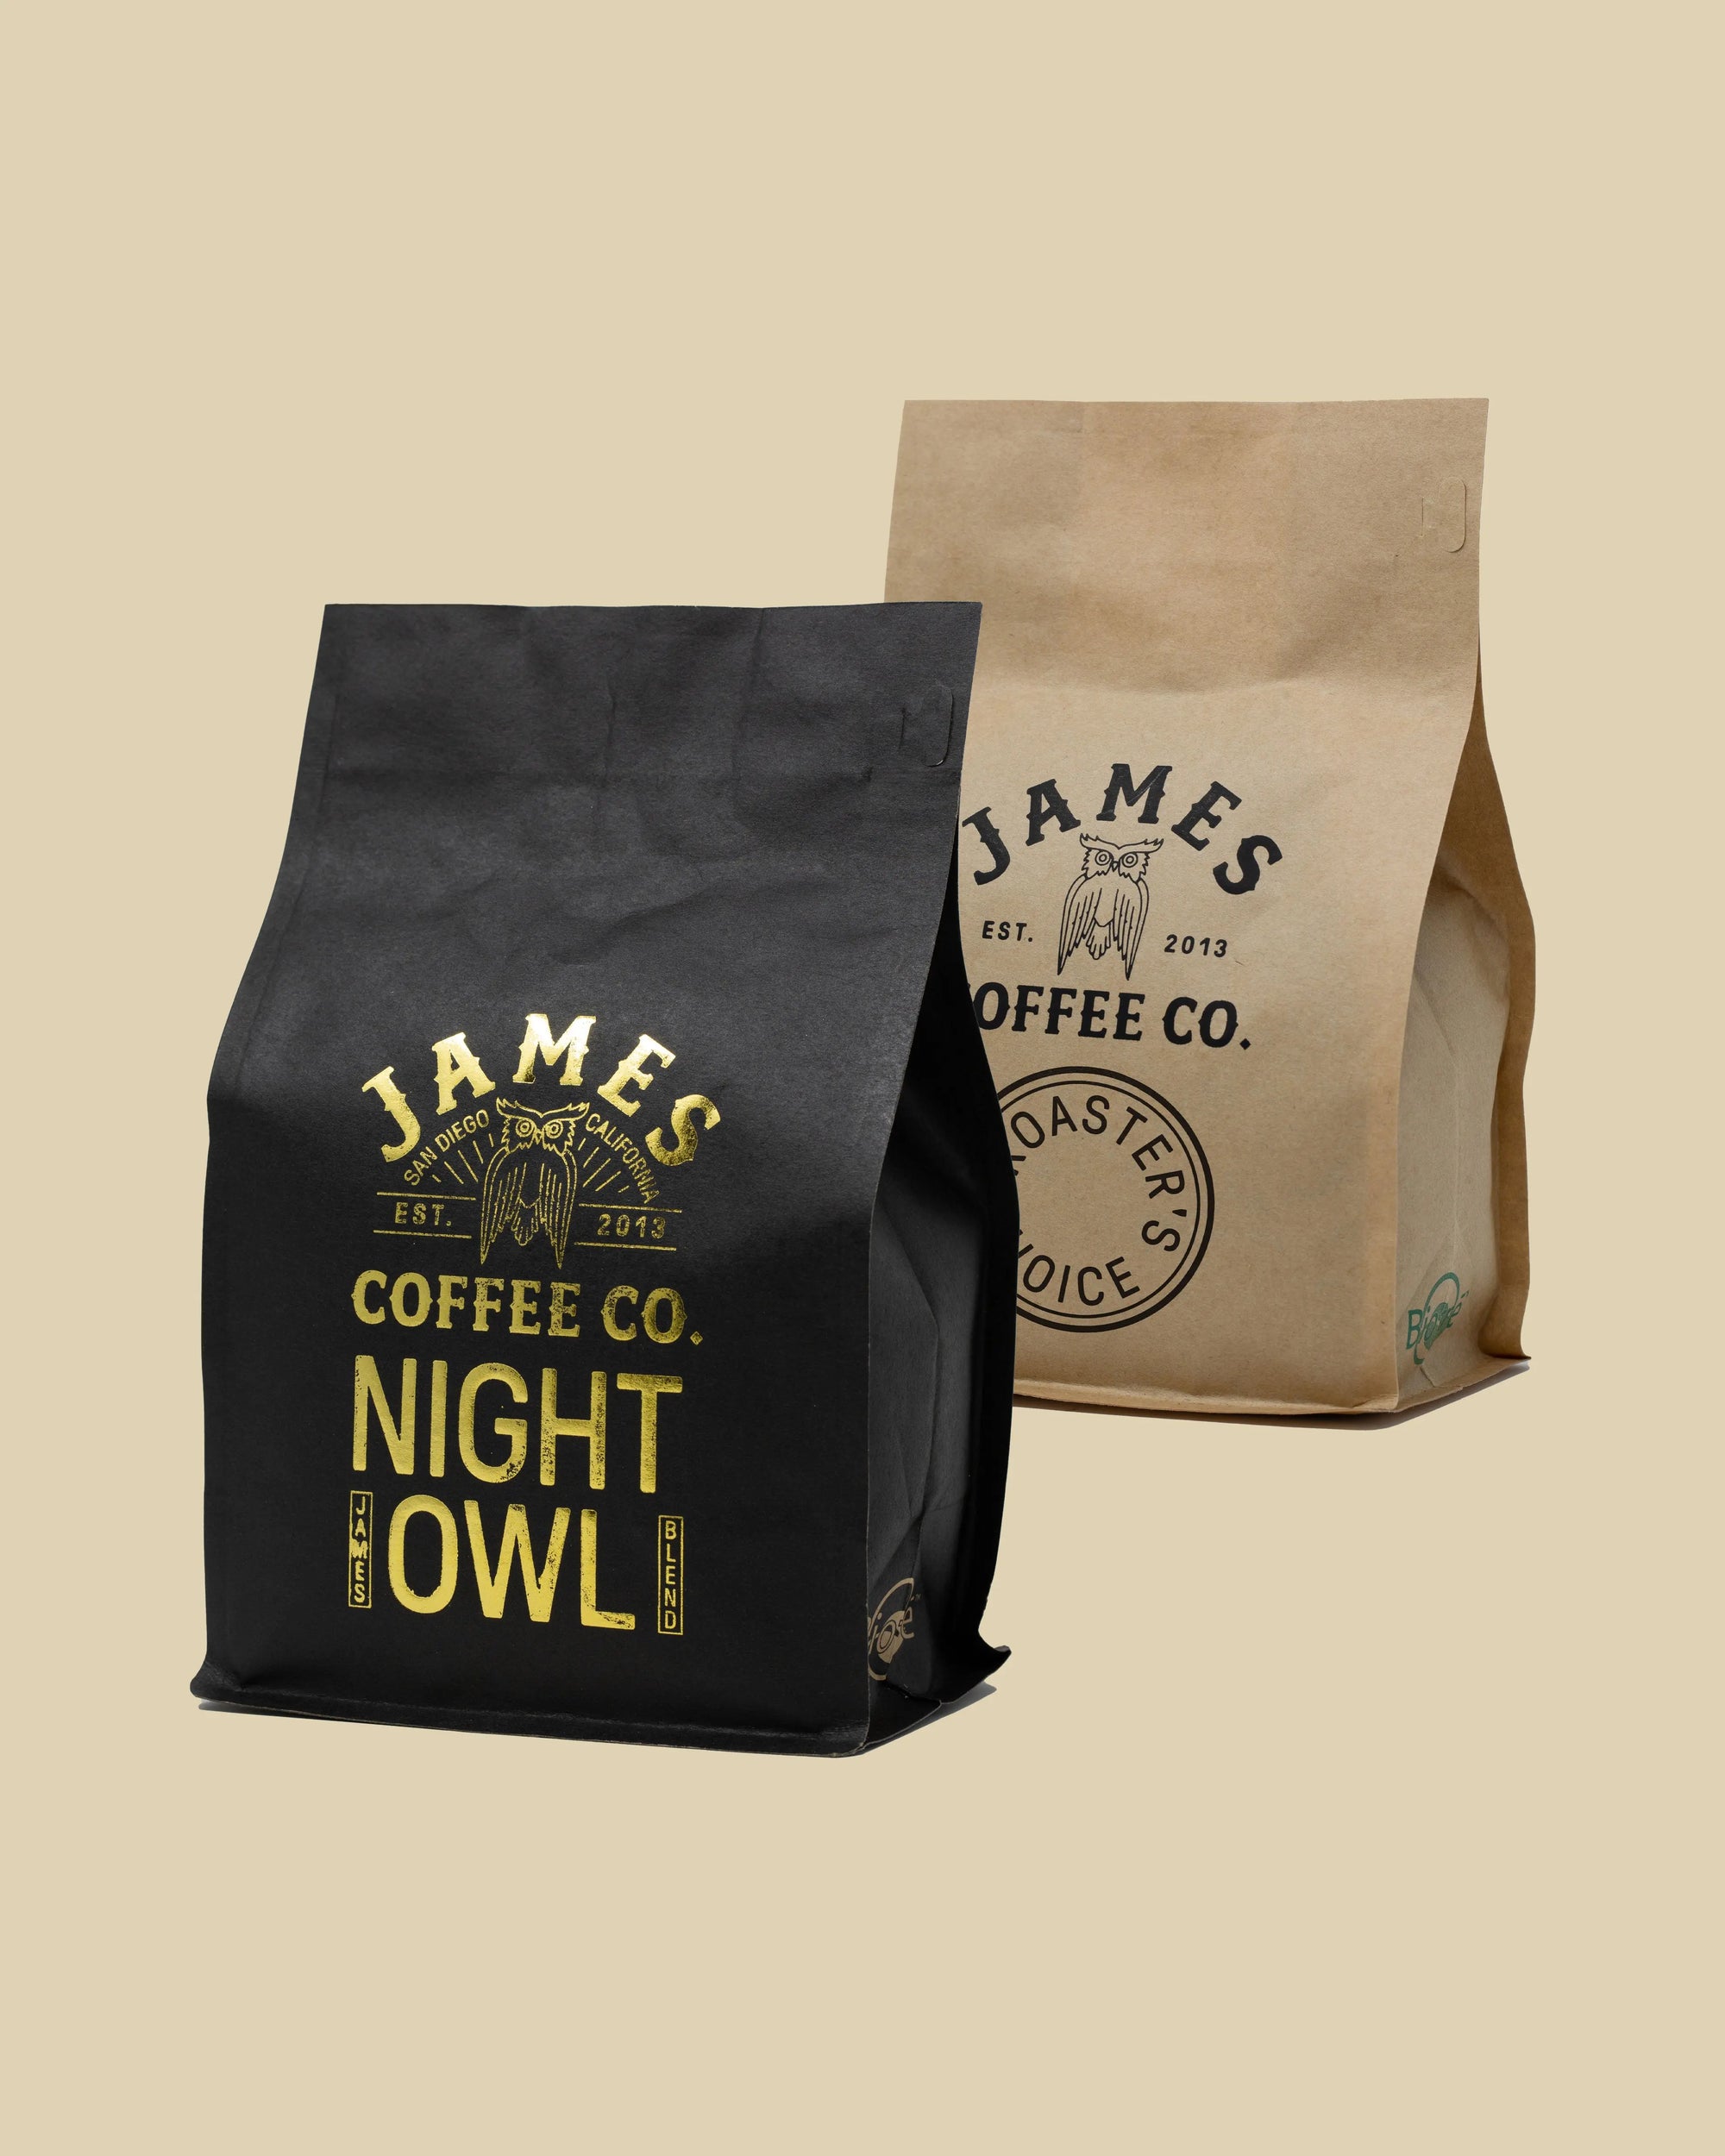 Night Owl/Roaster's Choice 6-Month Gift Subscription James Coffee Co